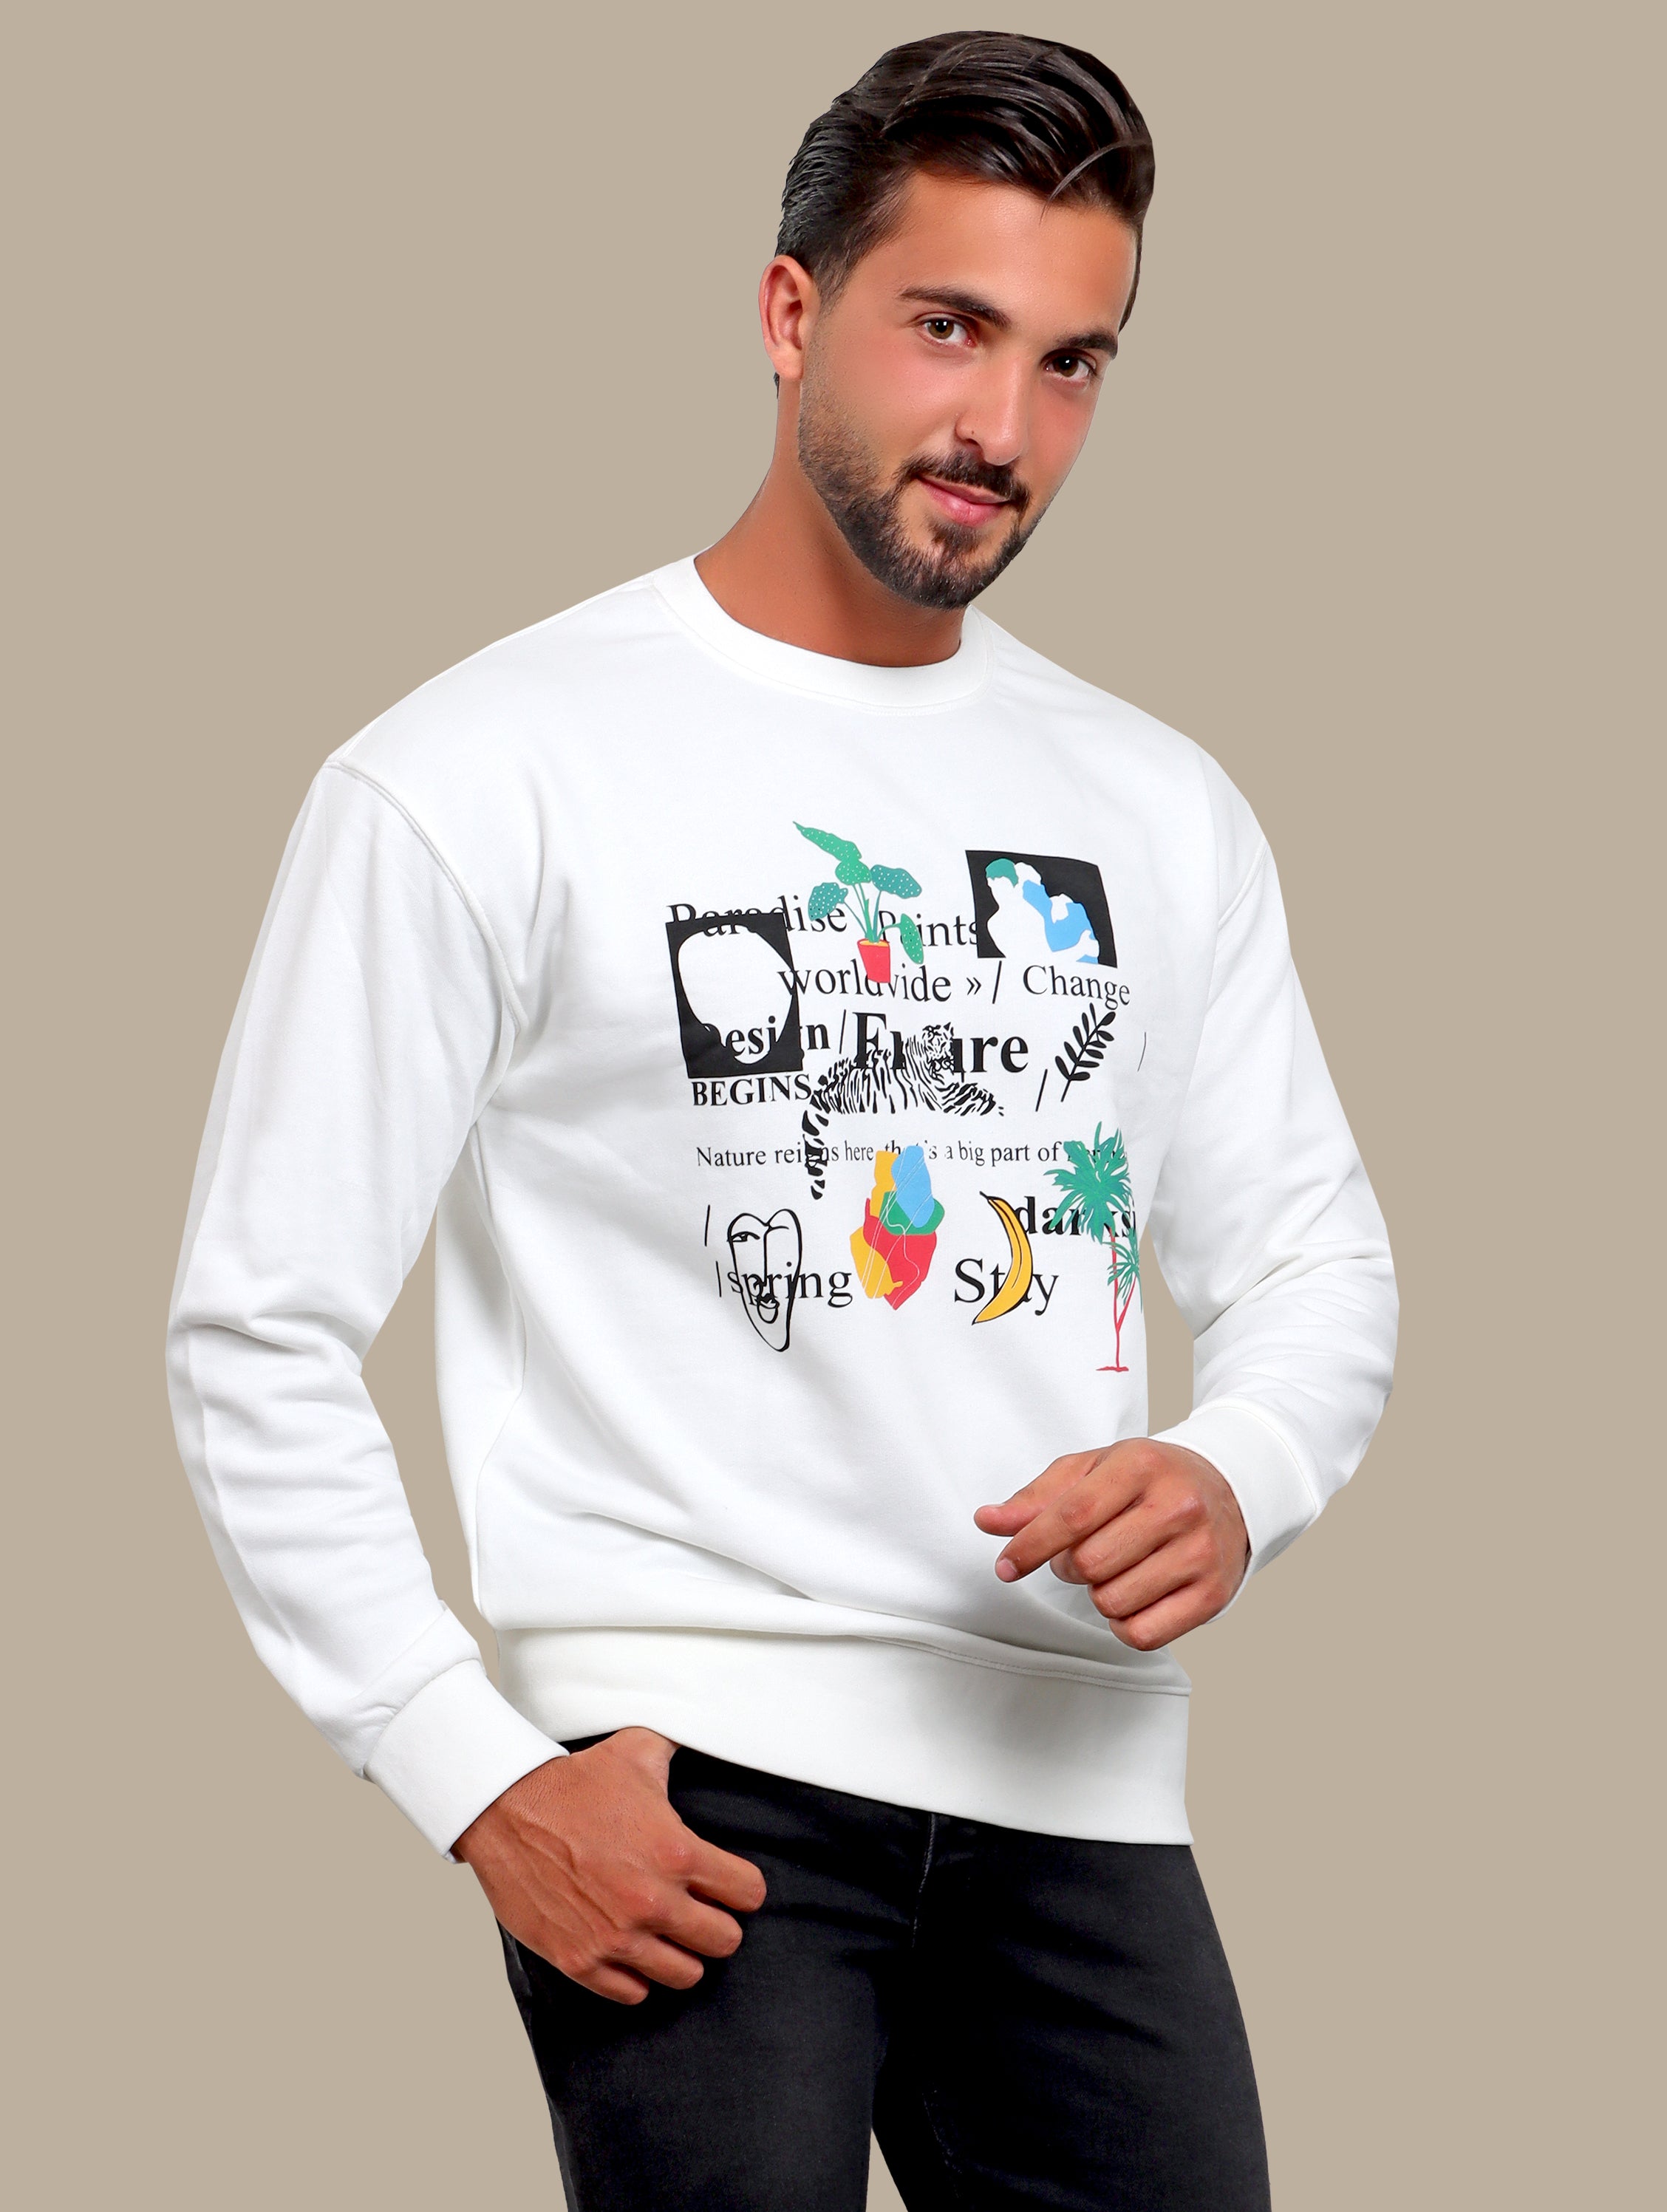 Frosty Whispers: White-Hued Elegance in Sweatshirt Typography